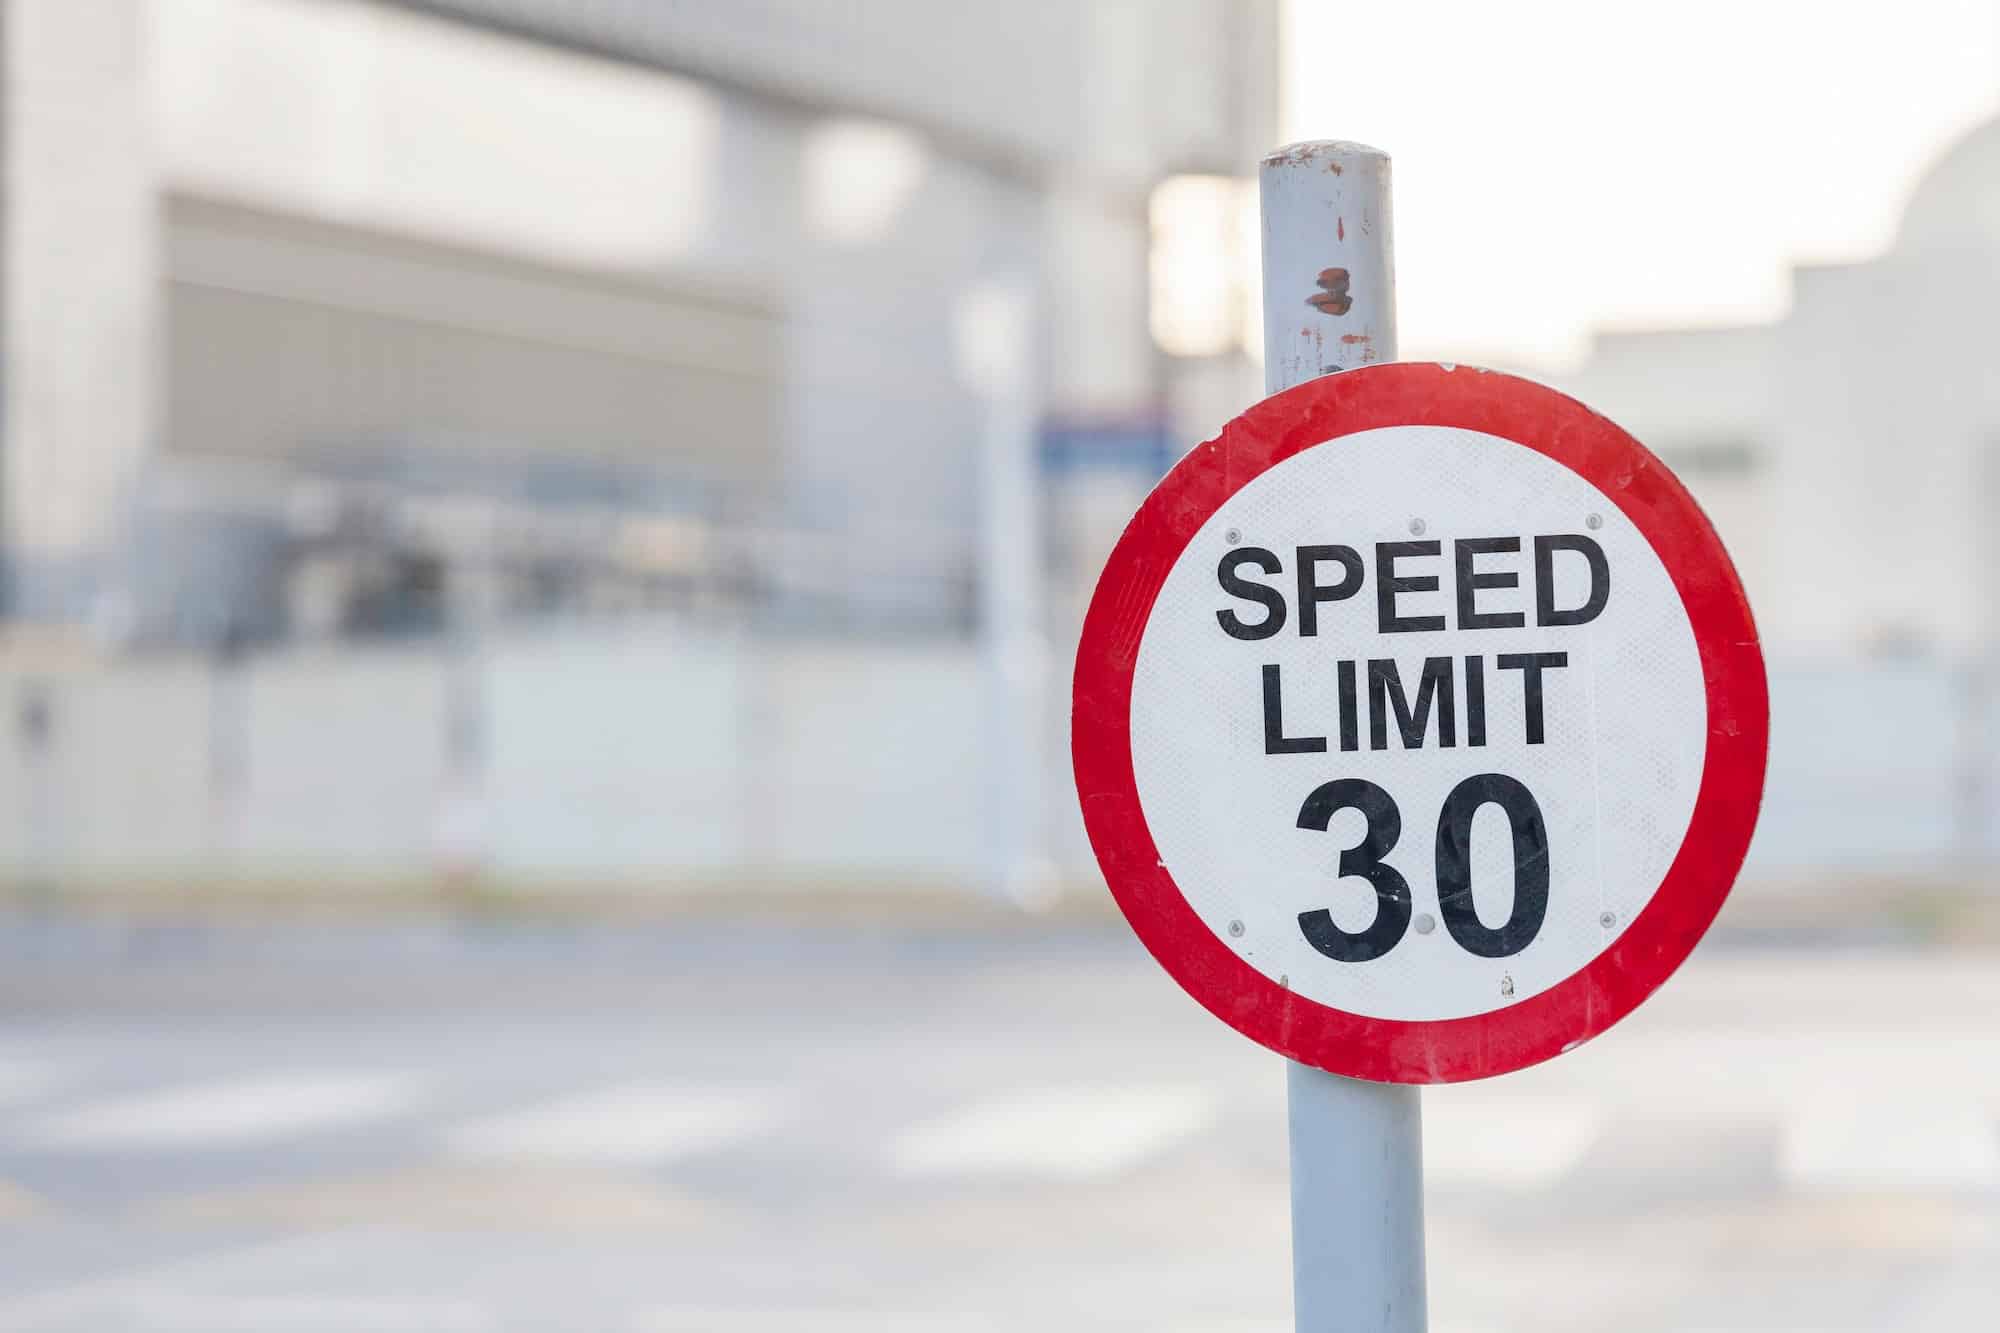 Road sign ‘Speed limit 30’